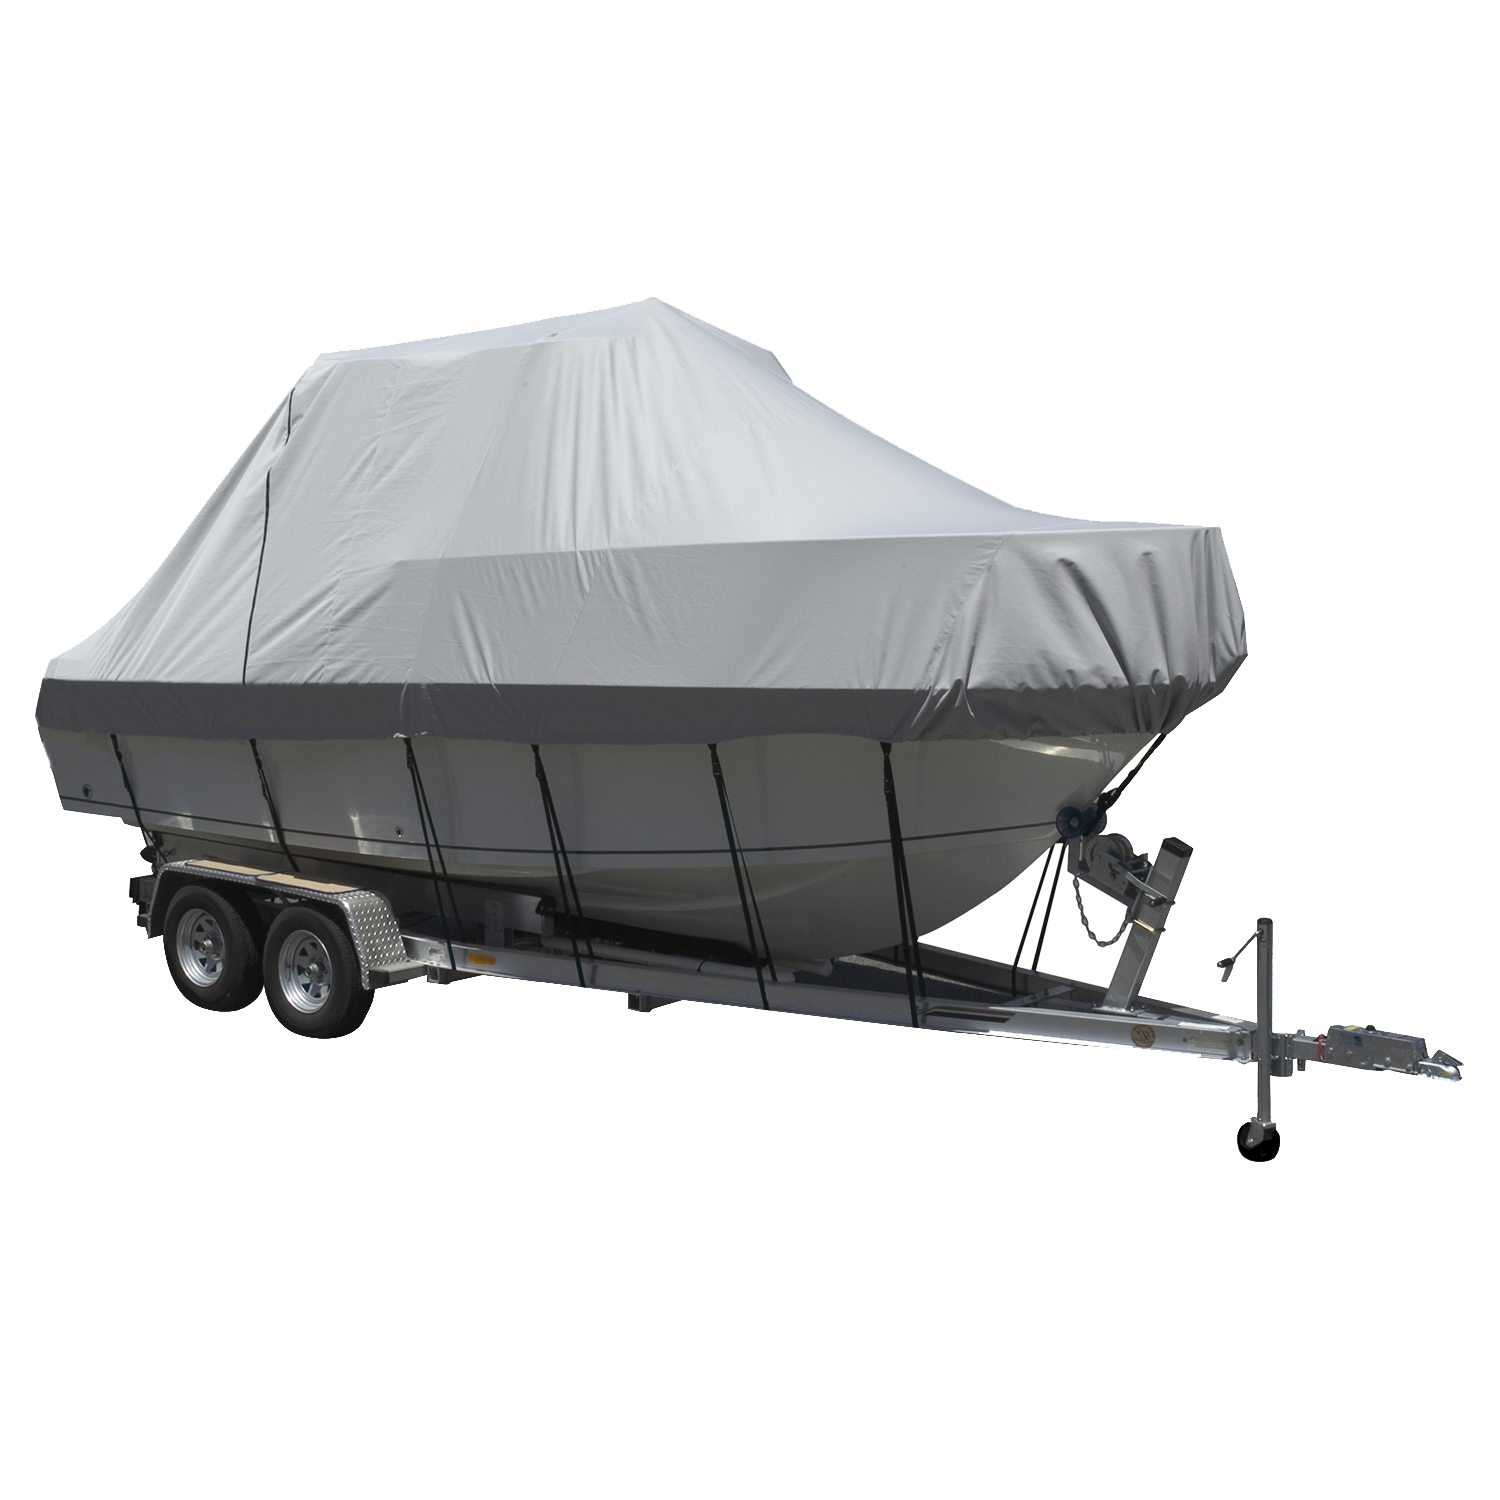 Carver Performance Poly-Guard Specialty Boat Cover f/22.5' Walk Around Cuddy & Center Console Boats - Grey